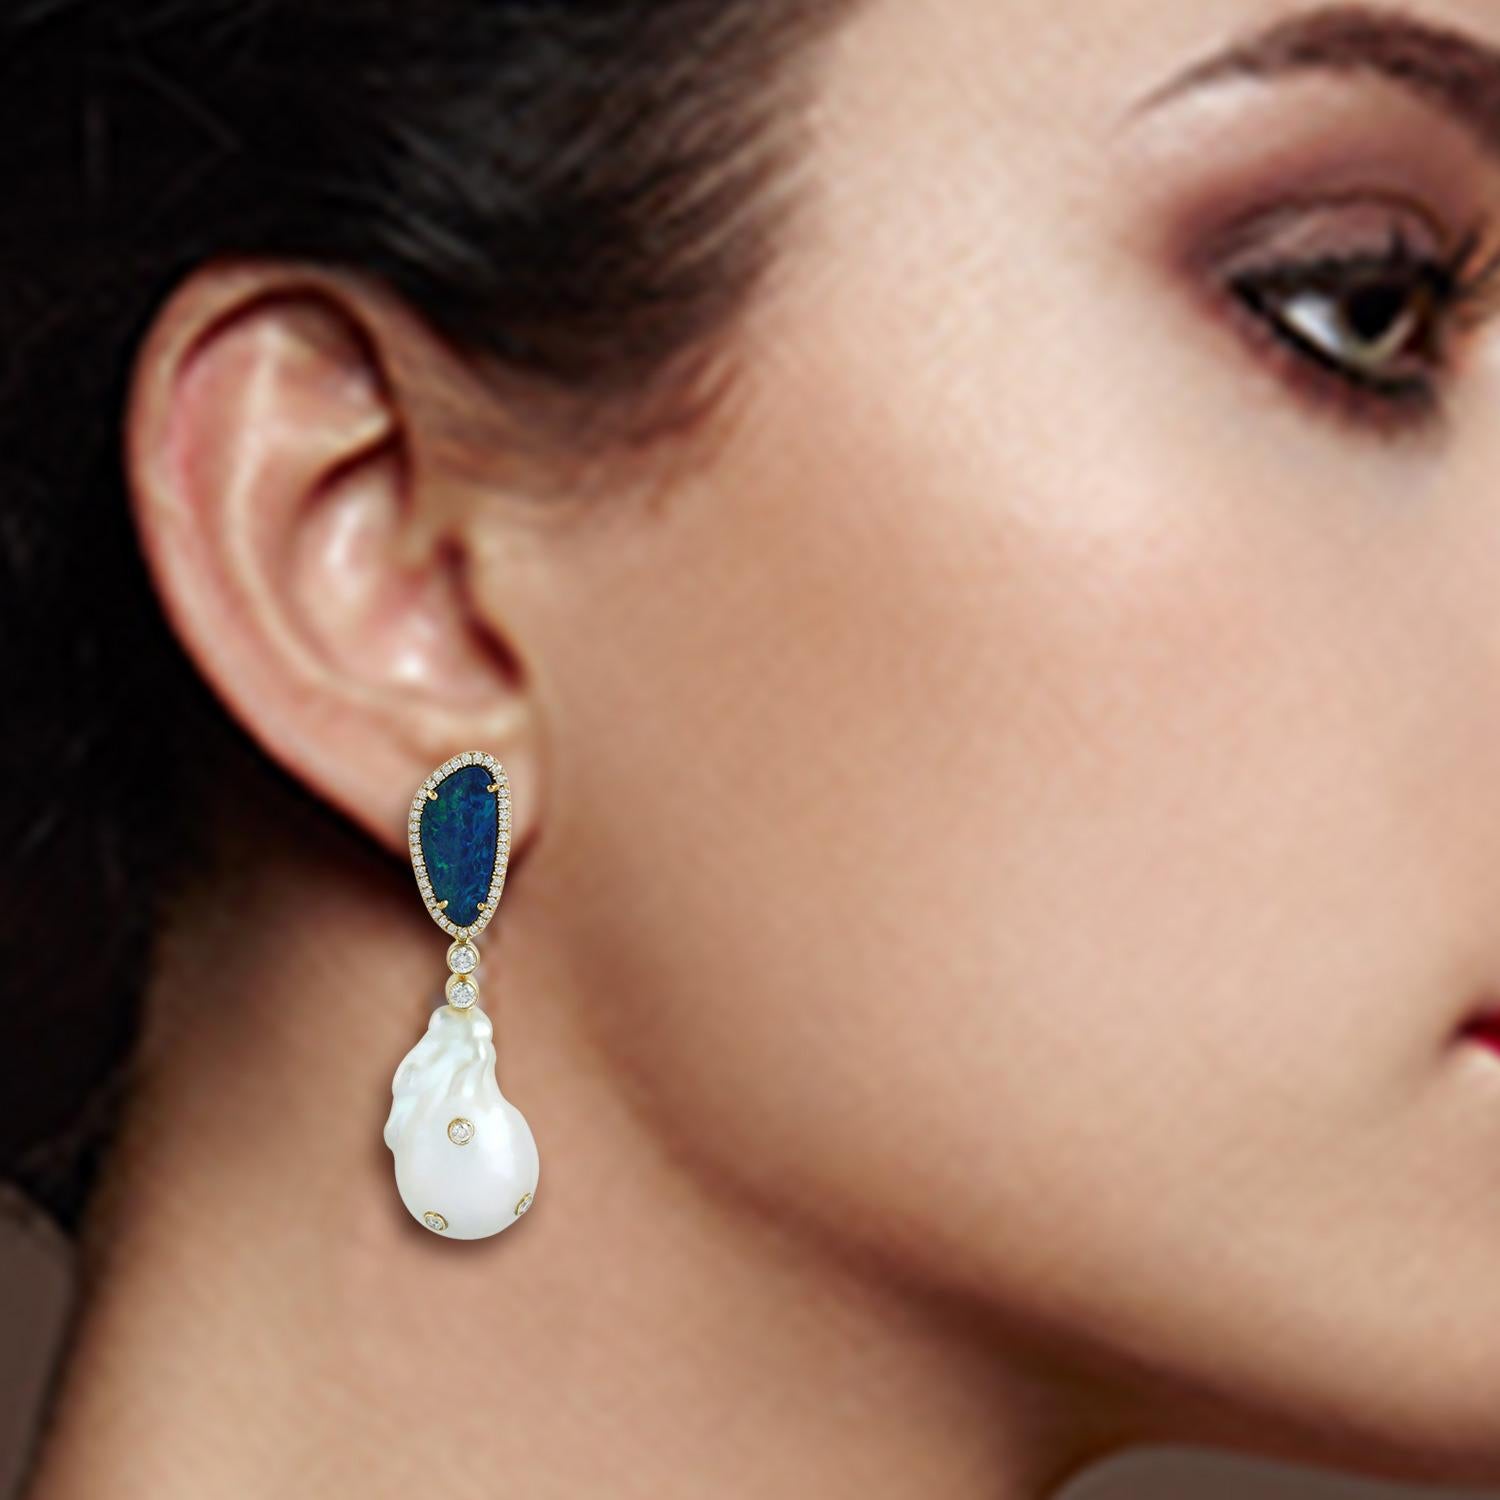 A stunning earrings handmade in 18K gold. It is set in 3.15 carats opal doublet, 63.99 carats pearl, 3.8 carats opal and 1.13 carats diamonds. 

FOLLOW  MEGHNA JEWELS storefront to view the latest collection & exclusive pieces.  Meghna Jewels is